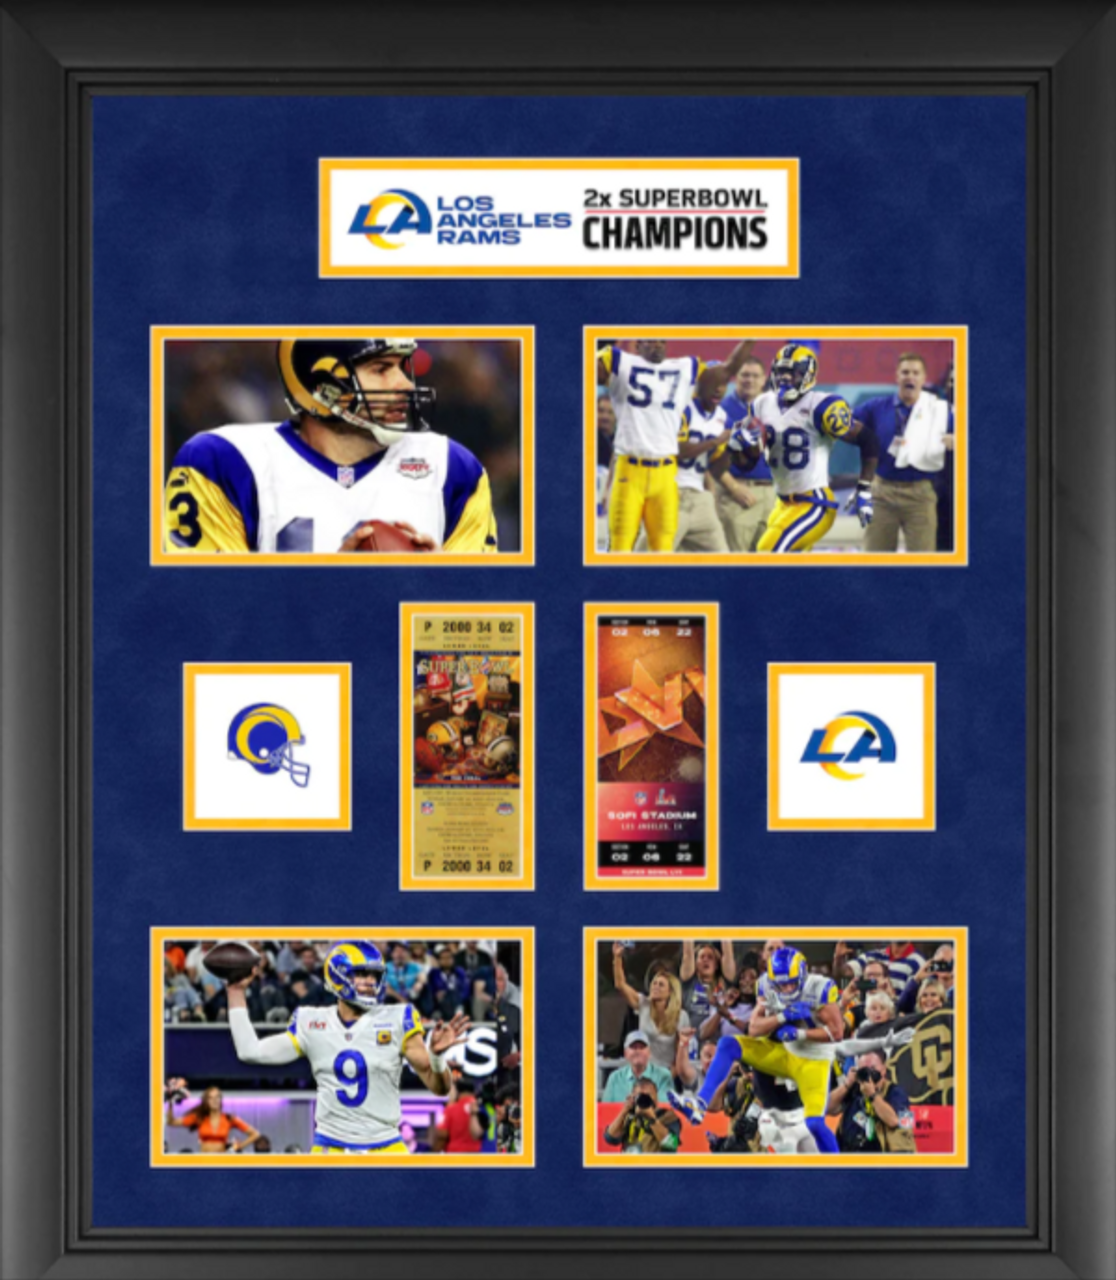 Los Angeles Rams 2-Time Super Bowl Champions Historic Ticket Framed Collage